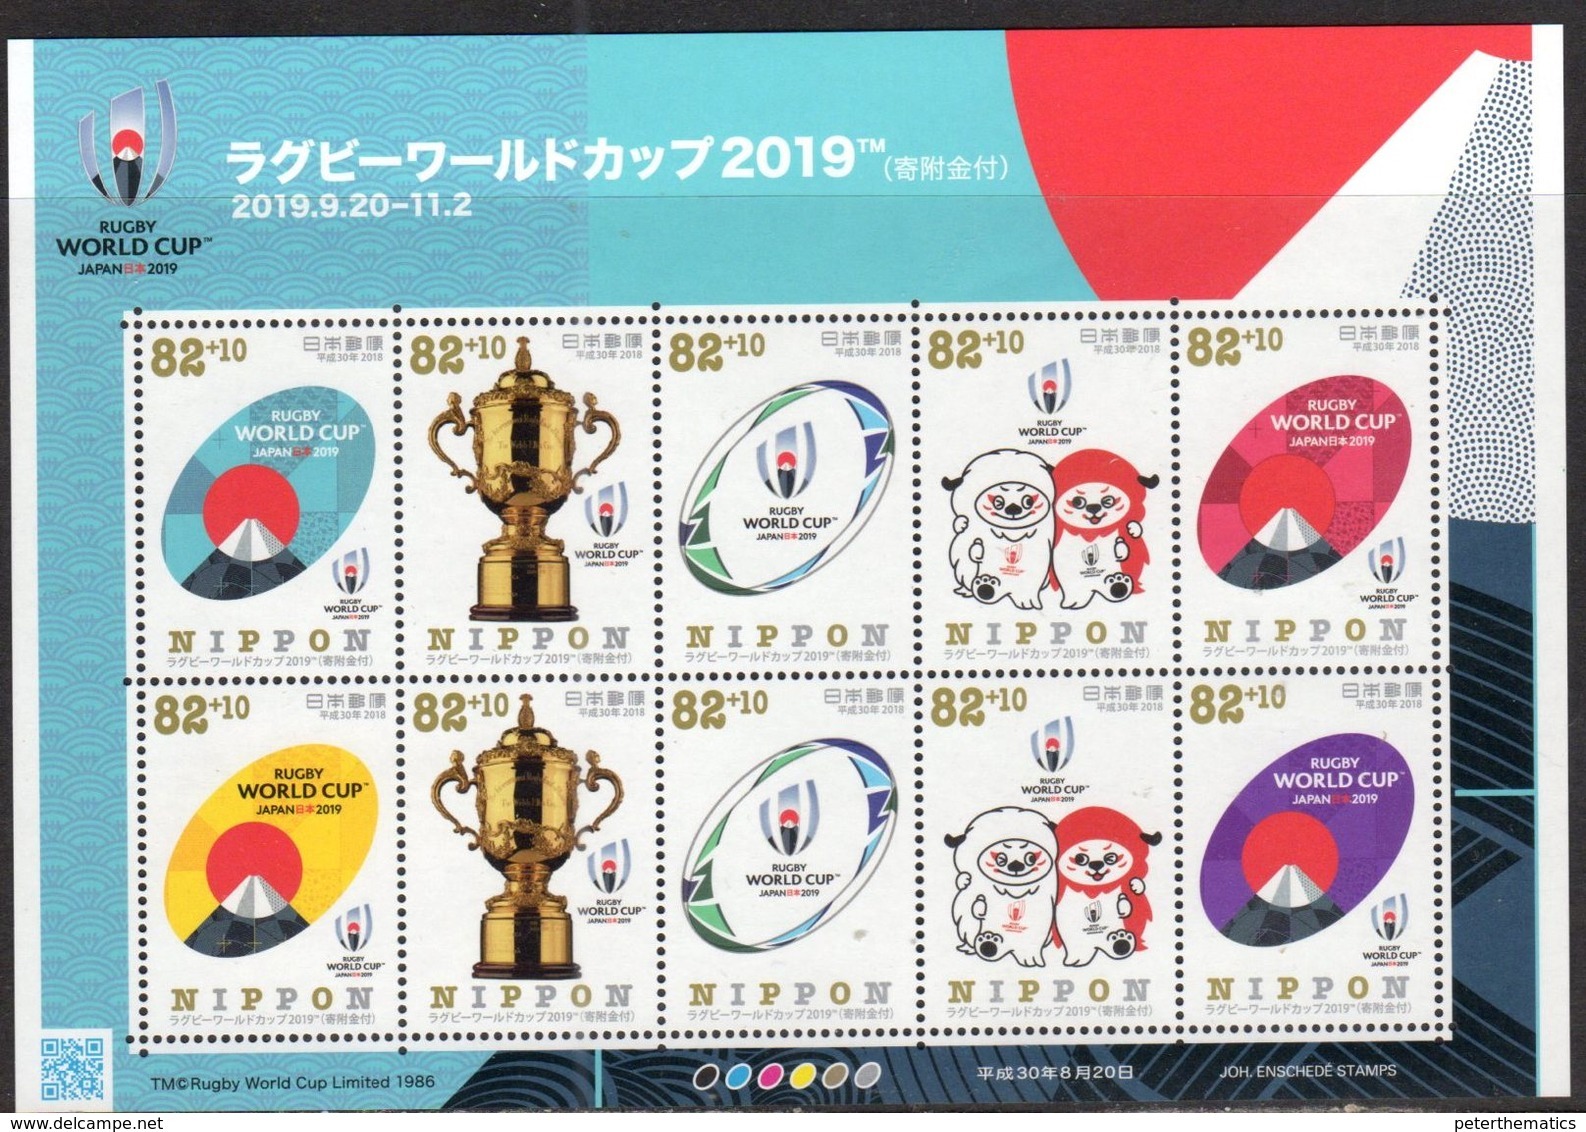 JAPAN, 2018, MNH, RUGBY, RUGBY WORLD CUP JAPAN 2019, MOUNTAINS, SHEETLET - Rugby